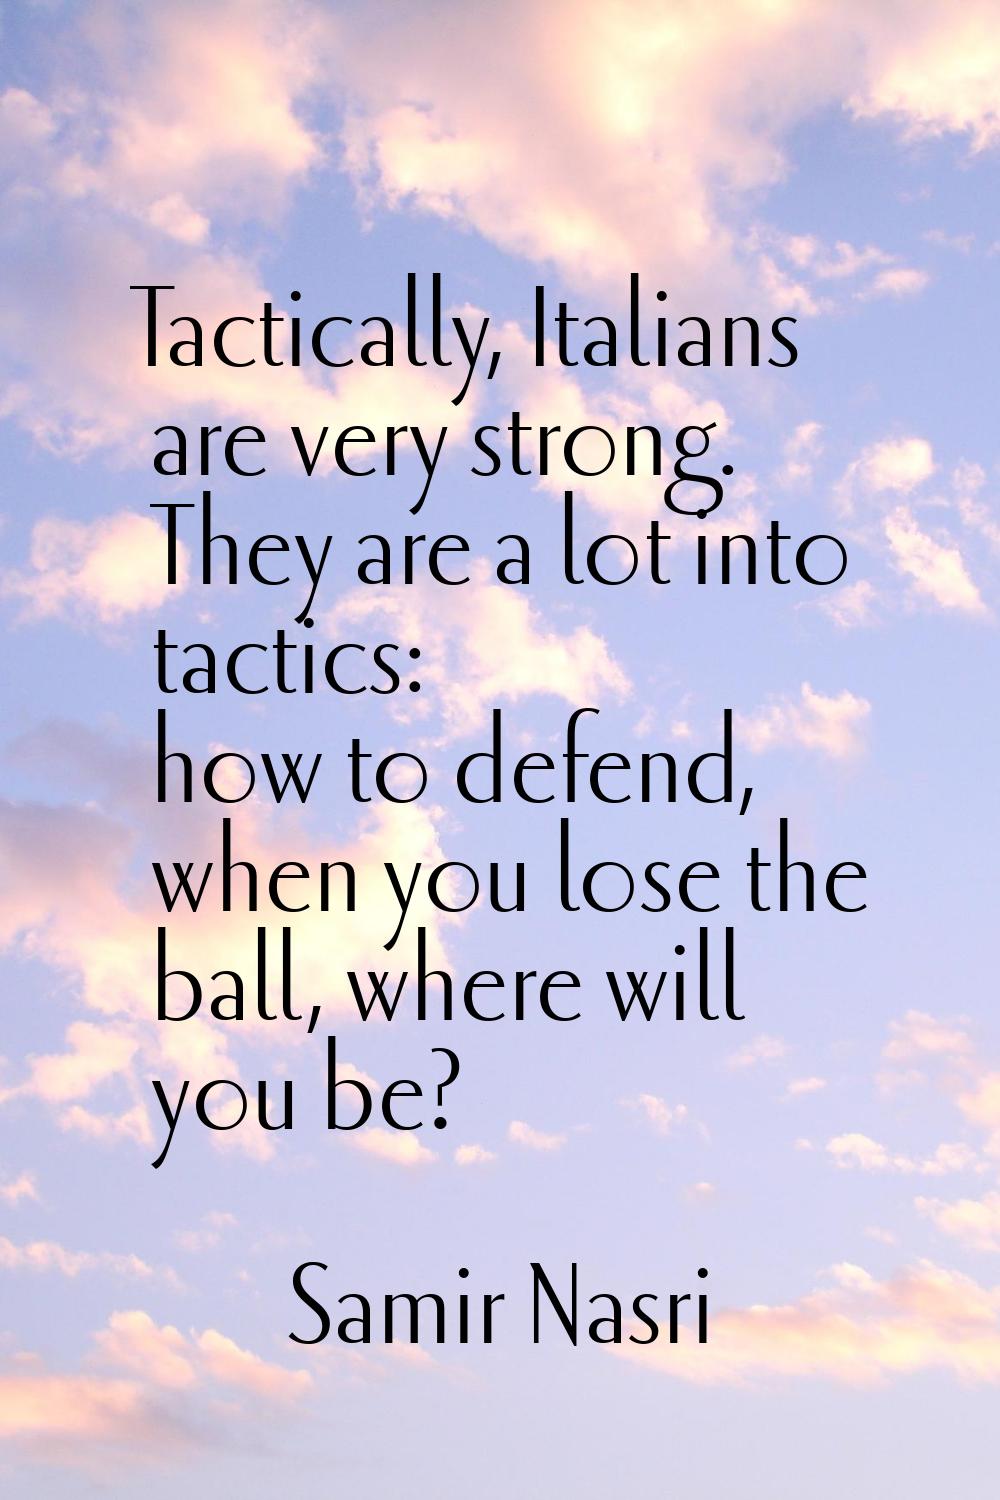 Tactically, Italians are very strong. They are a lot into tactics: how to defend, when you lose the